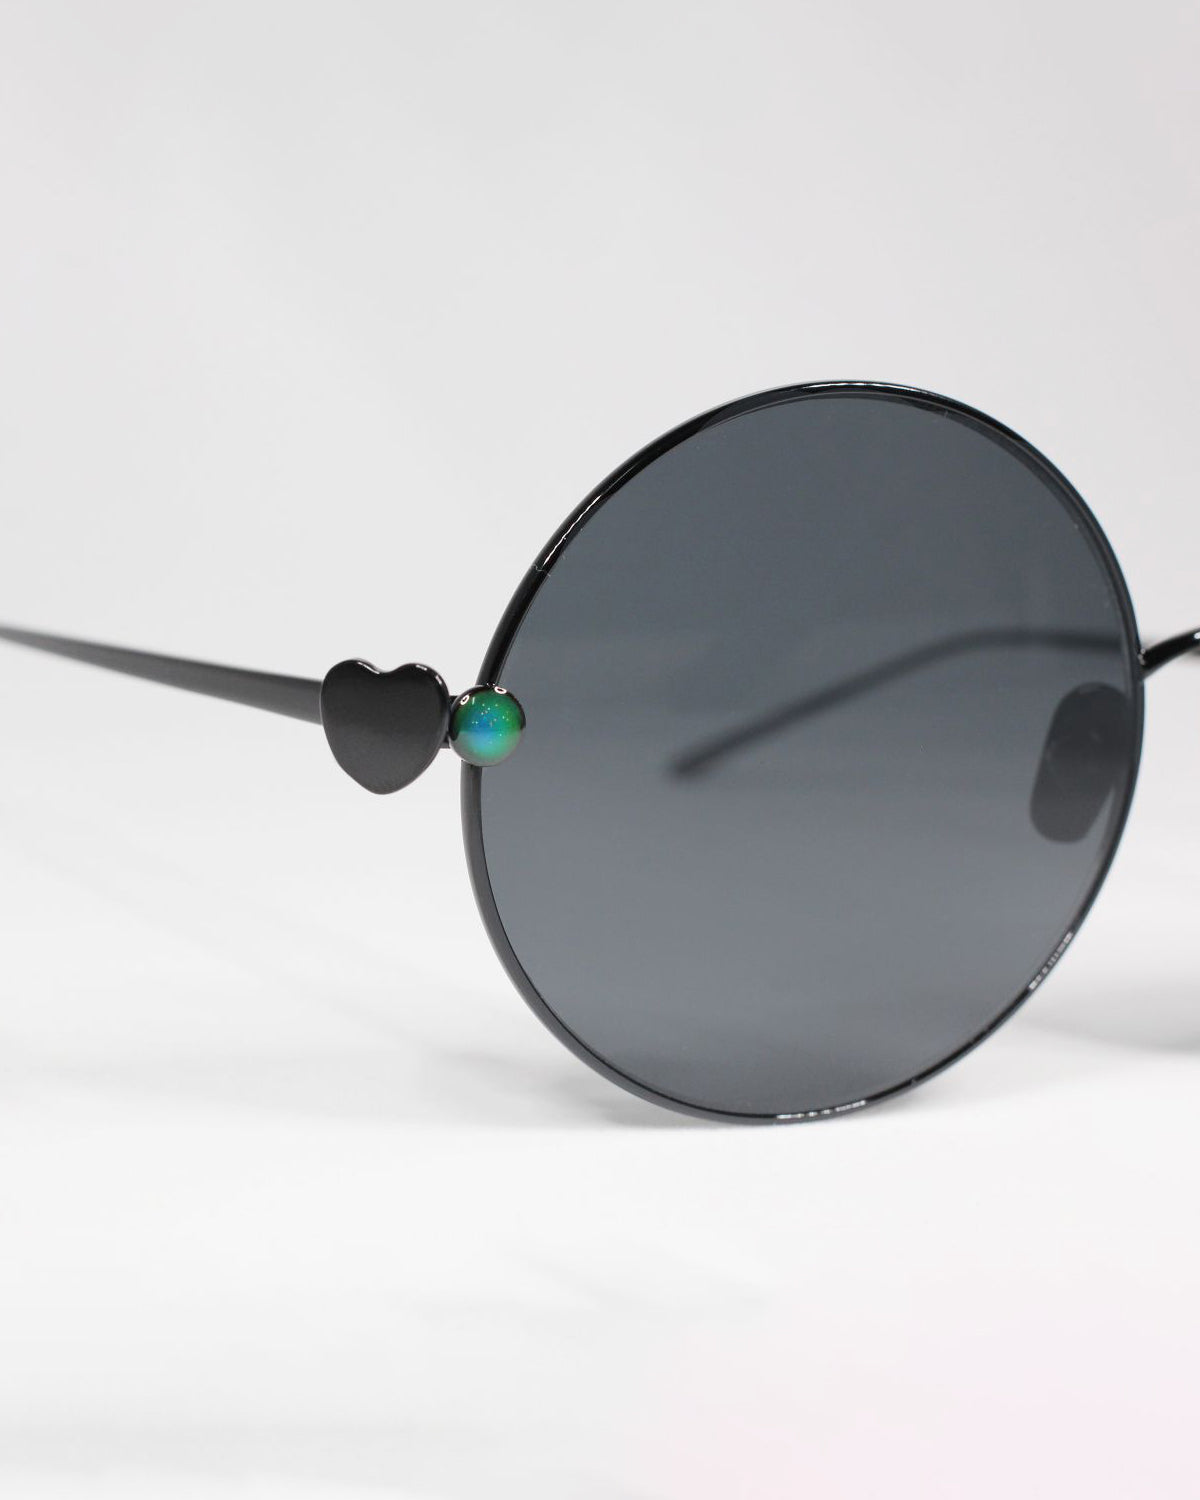 A pair of For Art&#39;s Sake® Love Story shades with round dark lenses and thin, stainless steel frames. The temples are adorned with a small heart detail and a single, multicolored gem on each side near the lenses. Offering UV protection, they come against a plain white background.